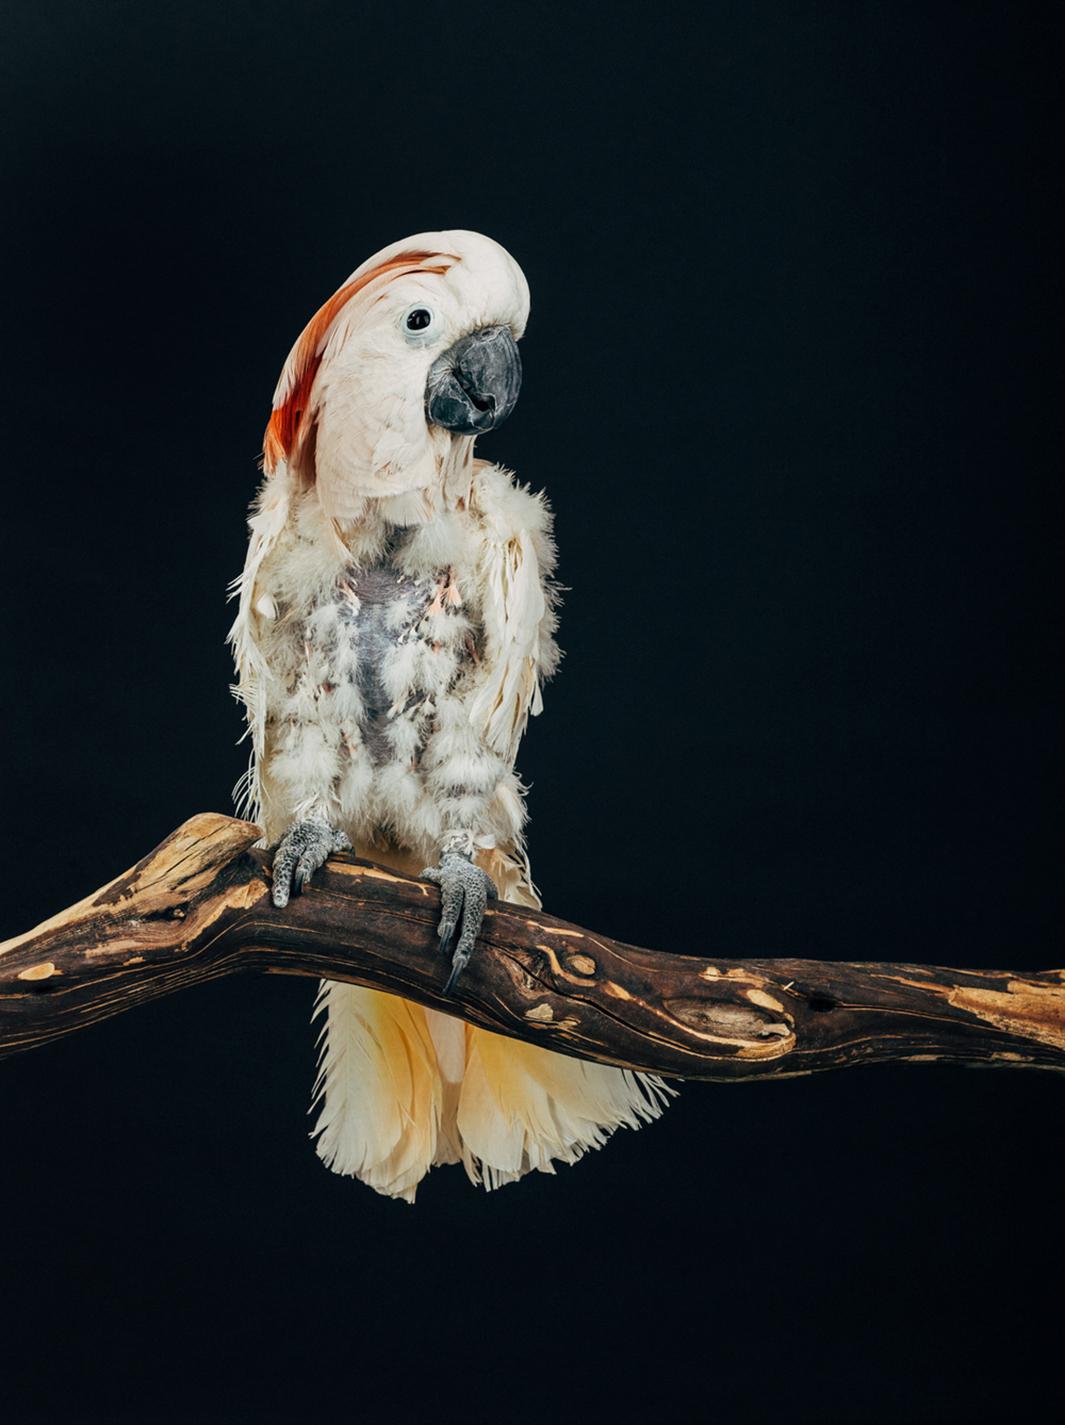 Oliver Regueiro: Earthbound is a series of portraits of exotic birds  sheltered in sanctuaries